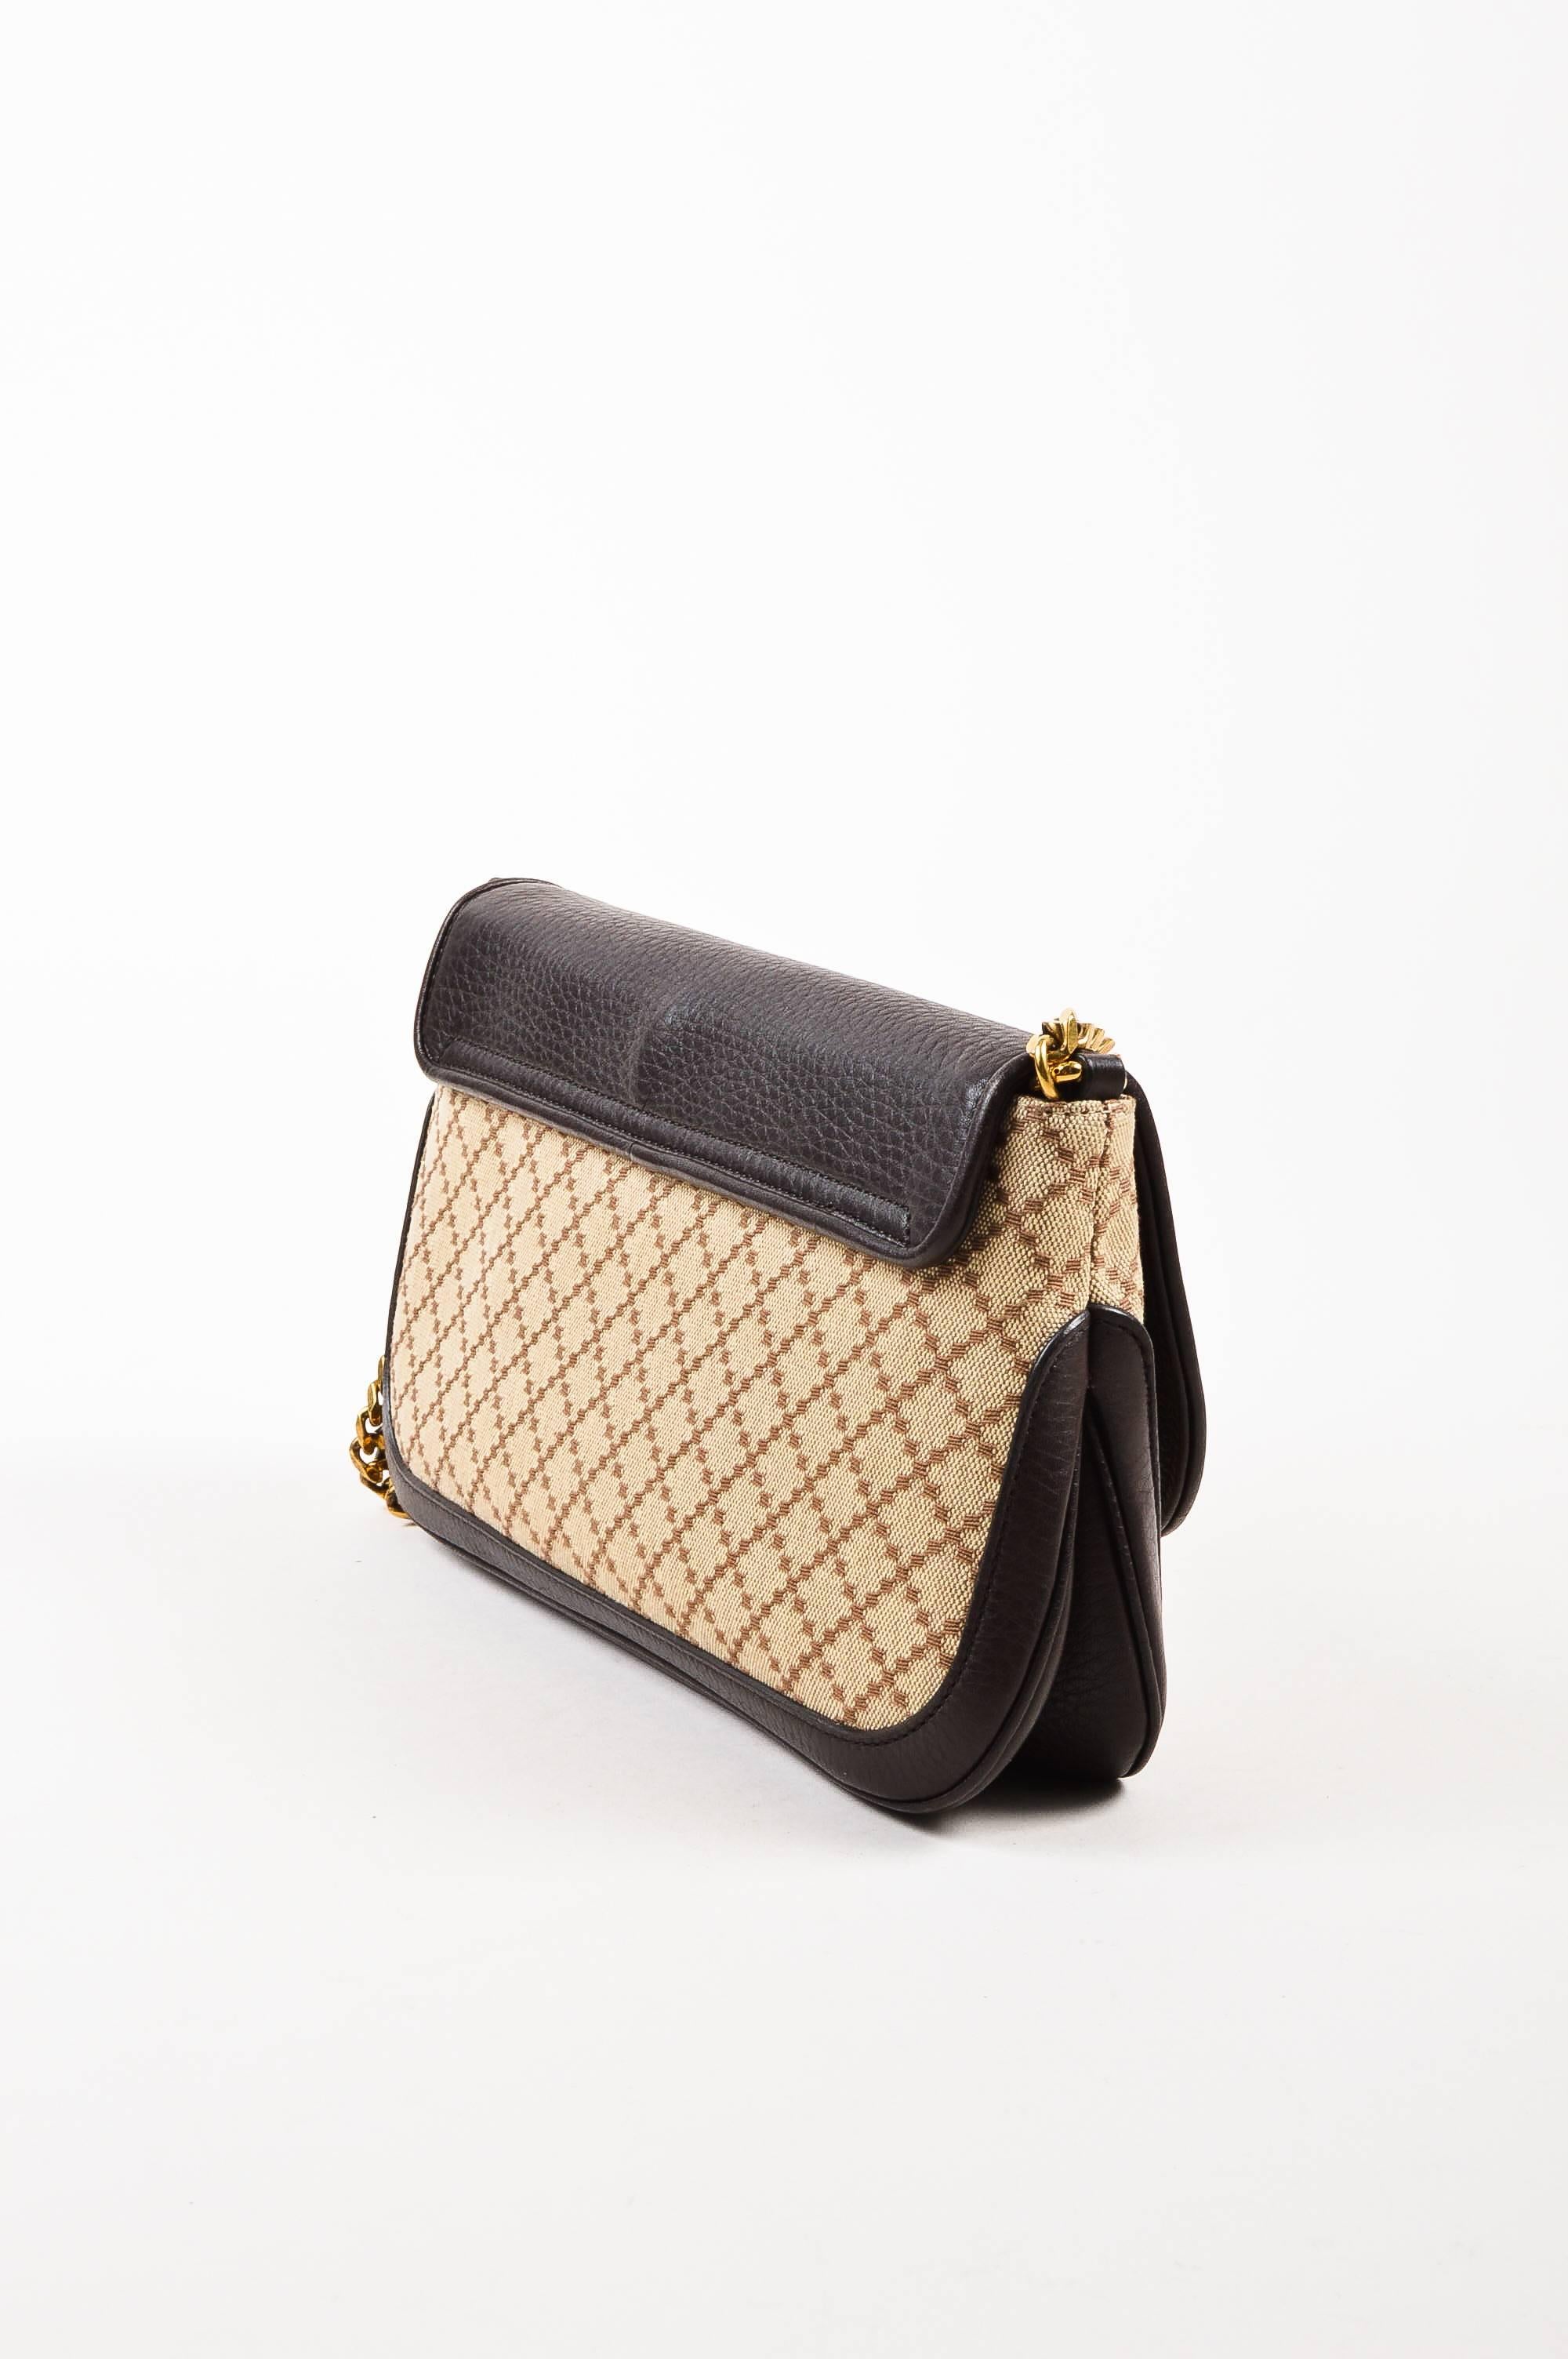 Retails for $1980. Gucci purse in a chic design that is great for daily use. From the 